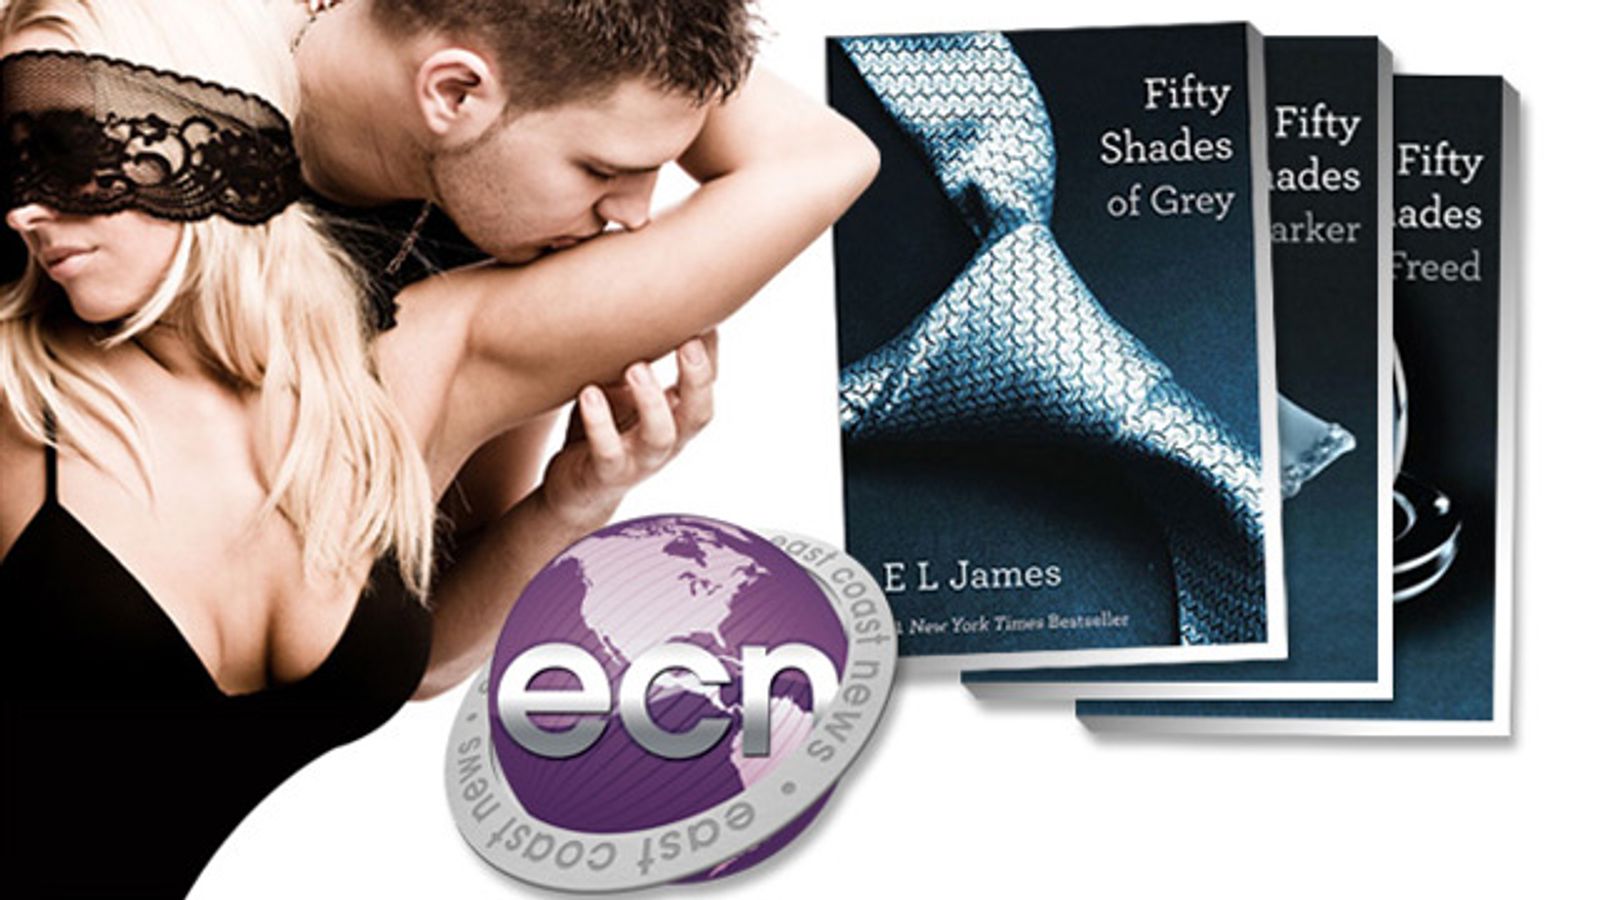 East Coast News Helps Retailers Capitalize on 'Fifty Shades'